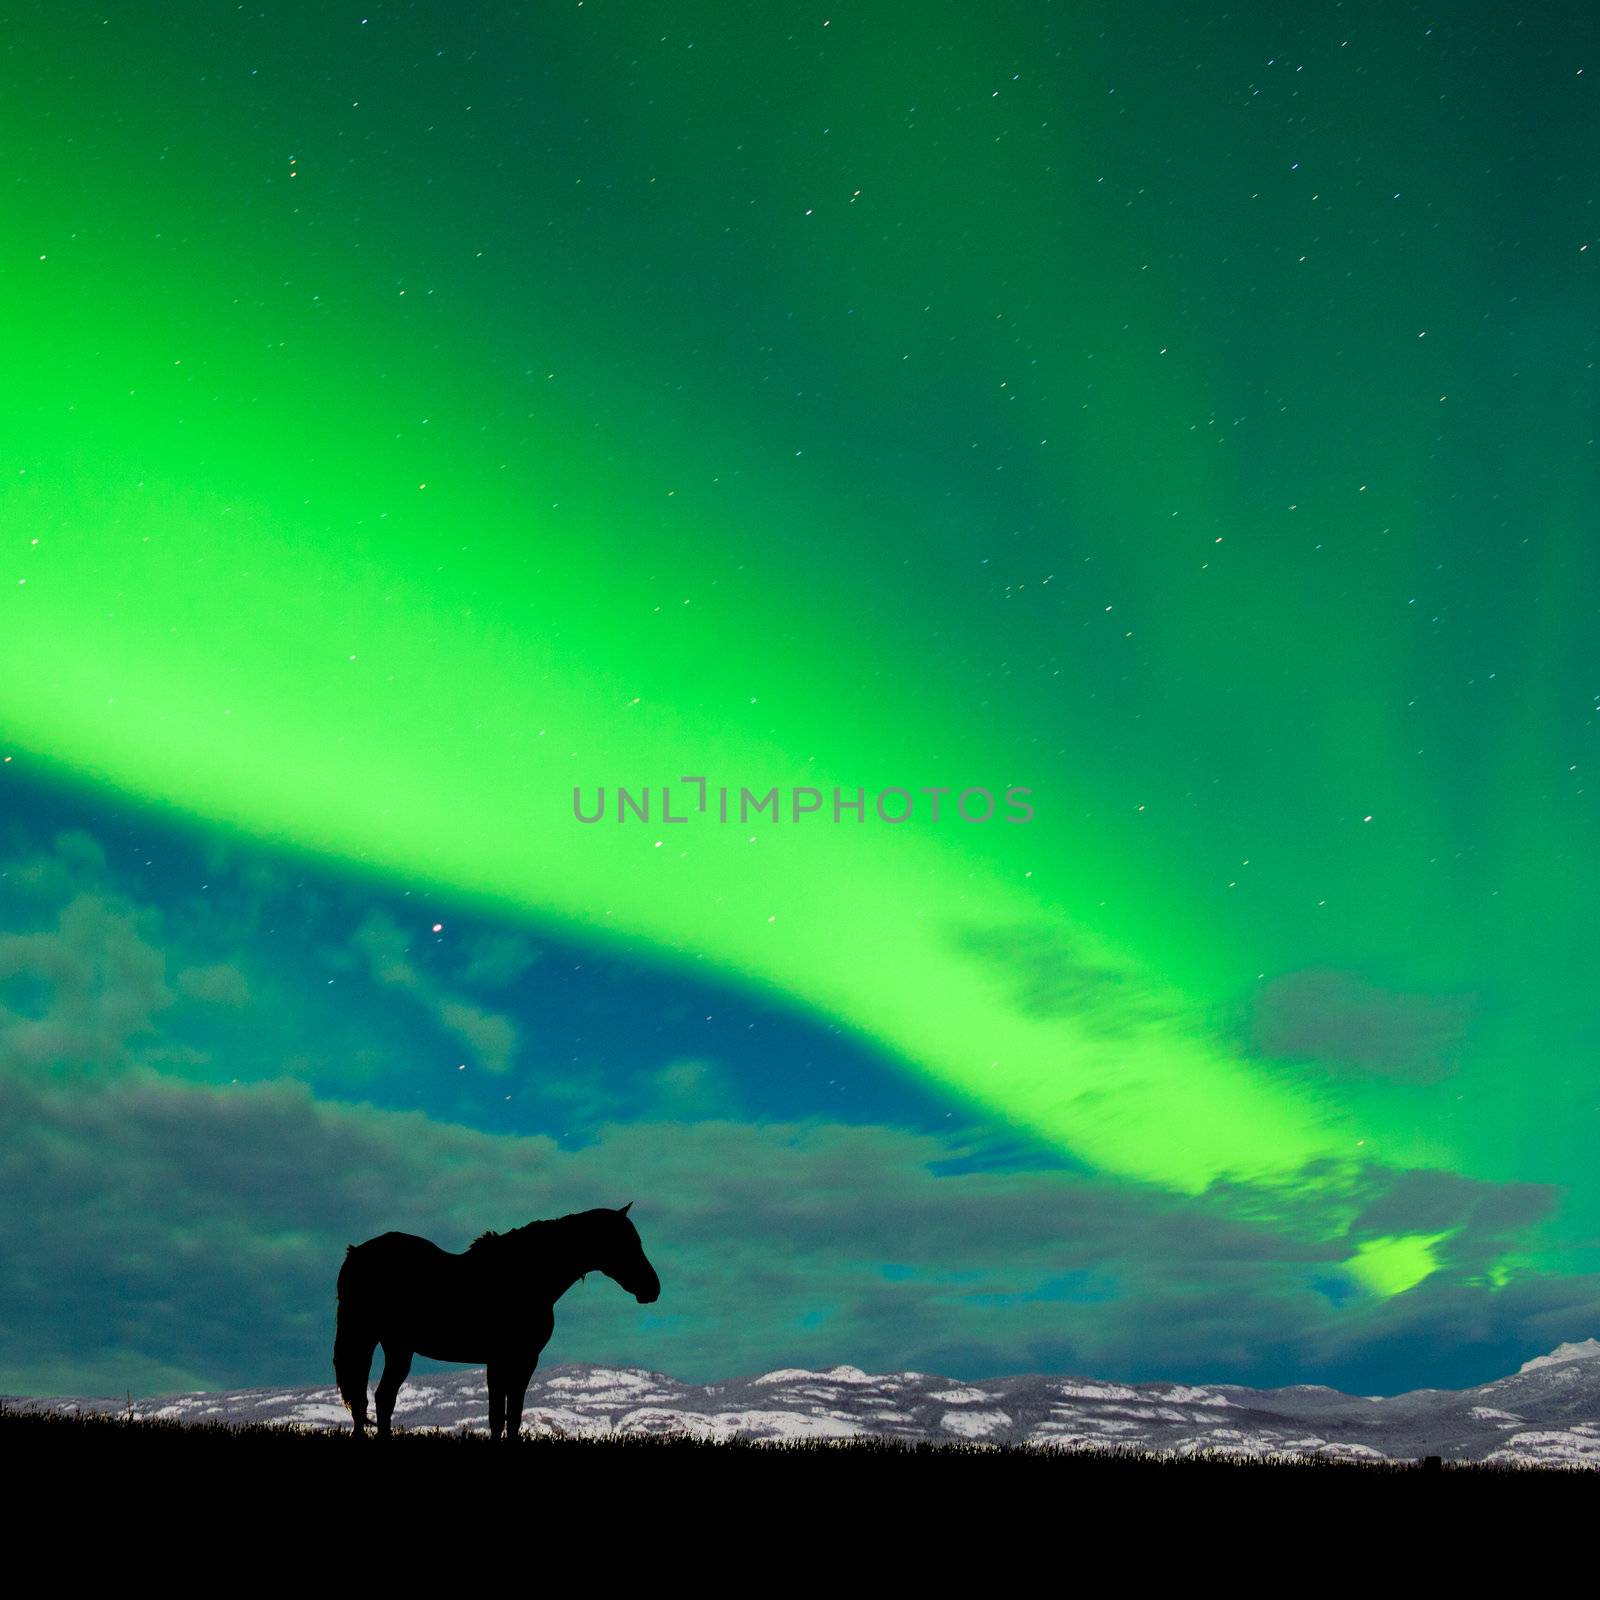 Silhouette of horse on pasture in moon-lit night with distant snowy mountain range and spectacular display of Northern Lights Aurora borealis above on starry night sky